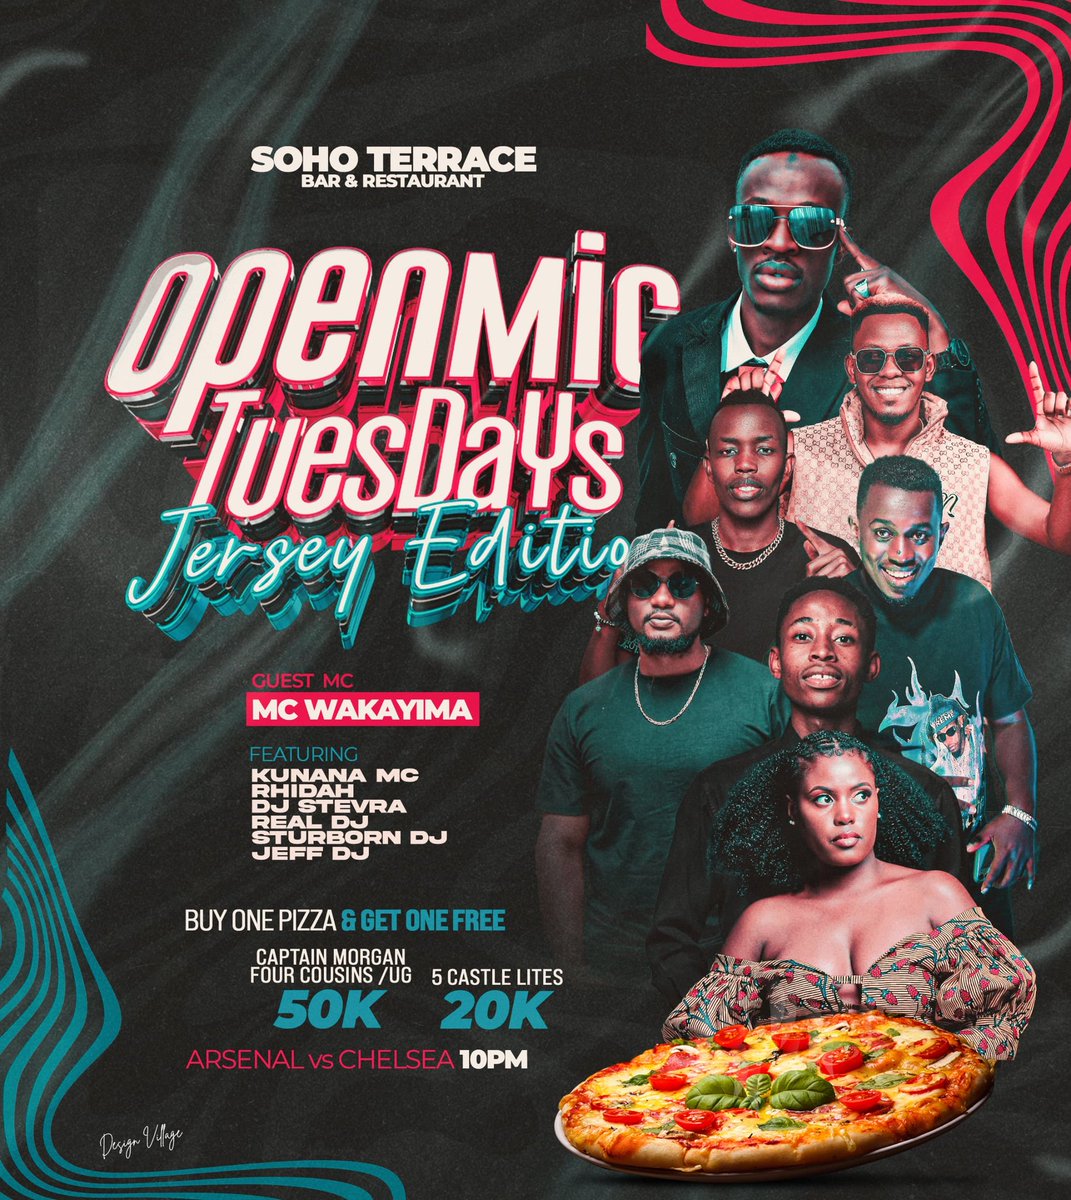 It's happening tonight at Soho Terrace Come for all the fun with an #openmickaraoke